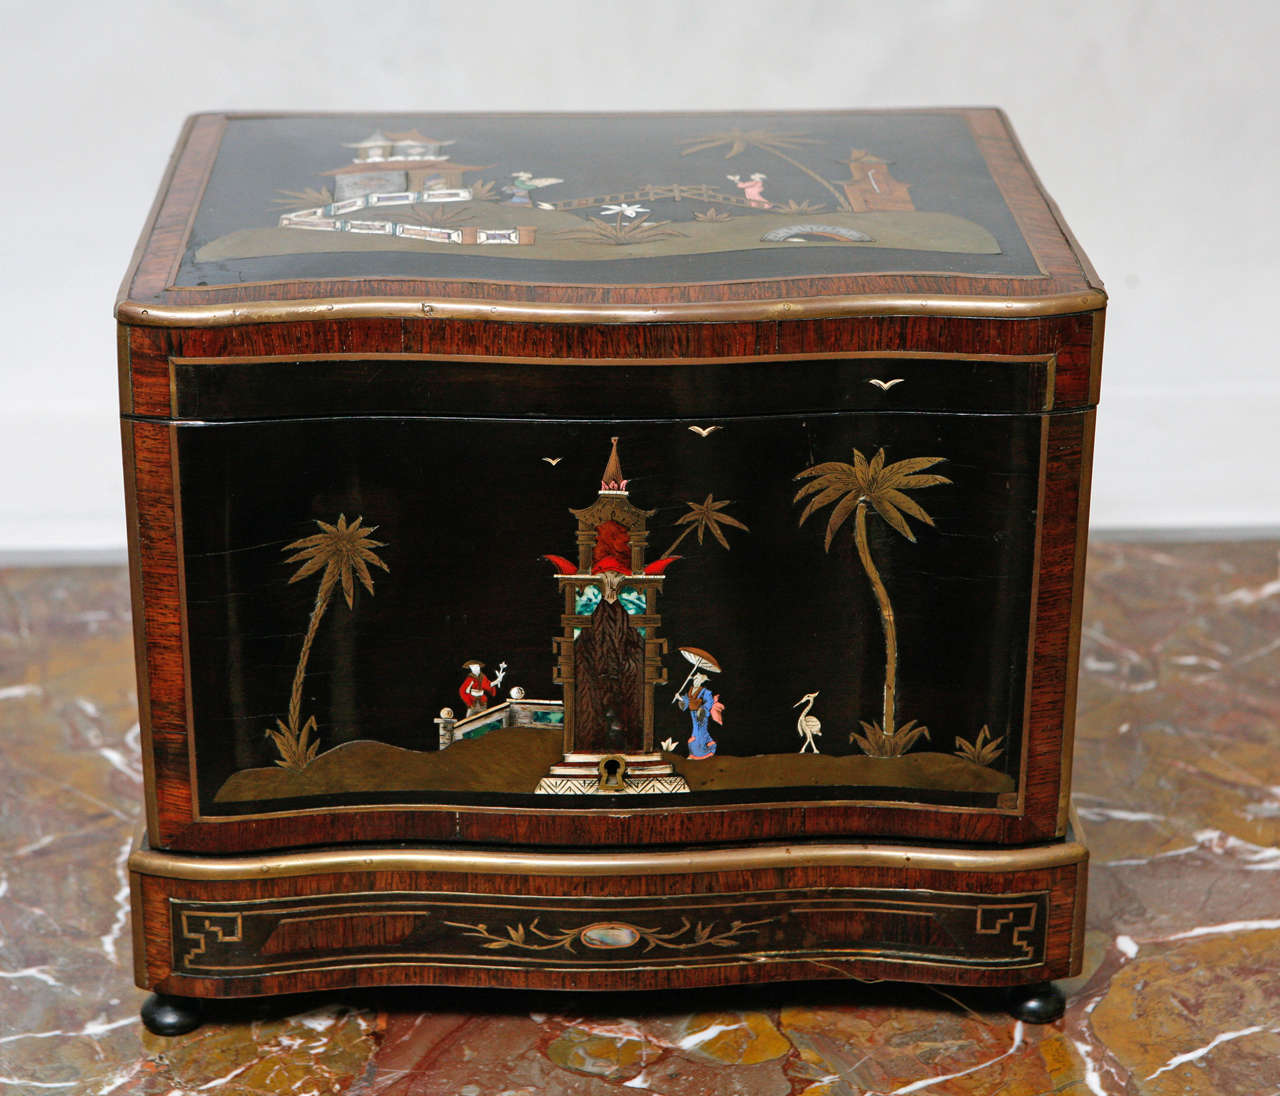 Very fine 19th c. French Liquor Box with Coral, Mother of Pearl, Ivory and Malachite, Copper and Brass Inlays. Baccarat Glasses and Bottles are housed inside box.